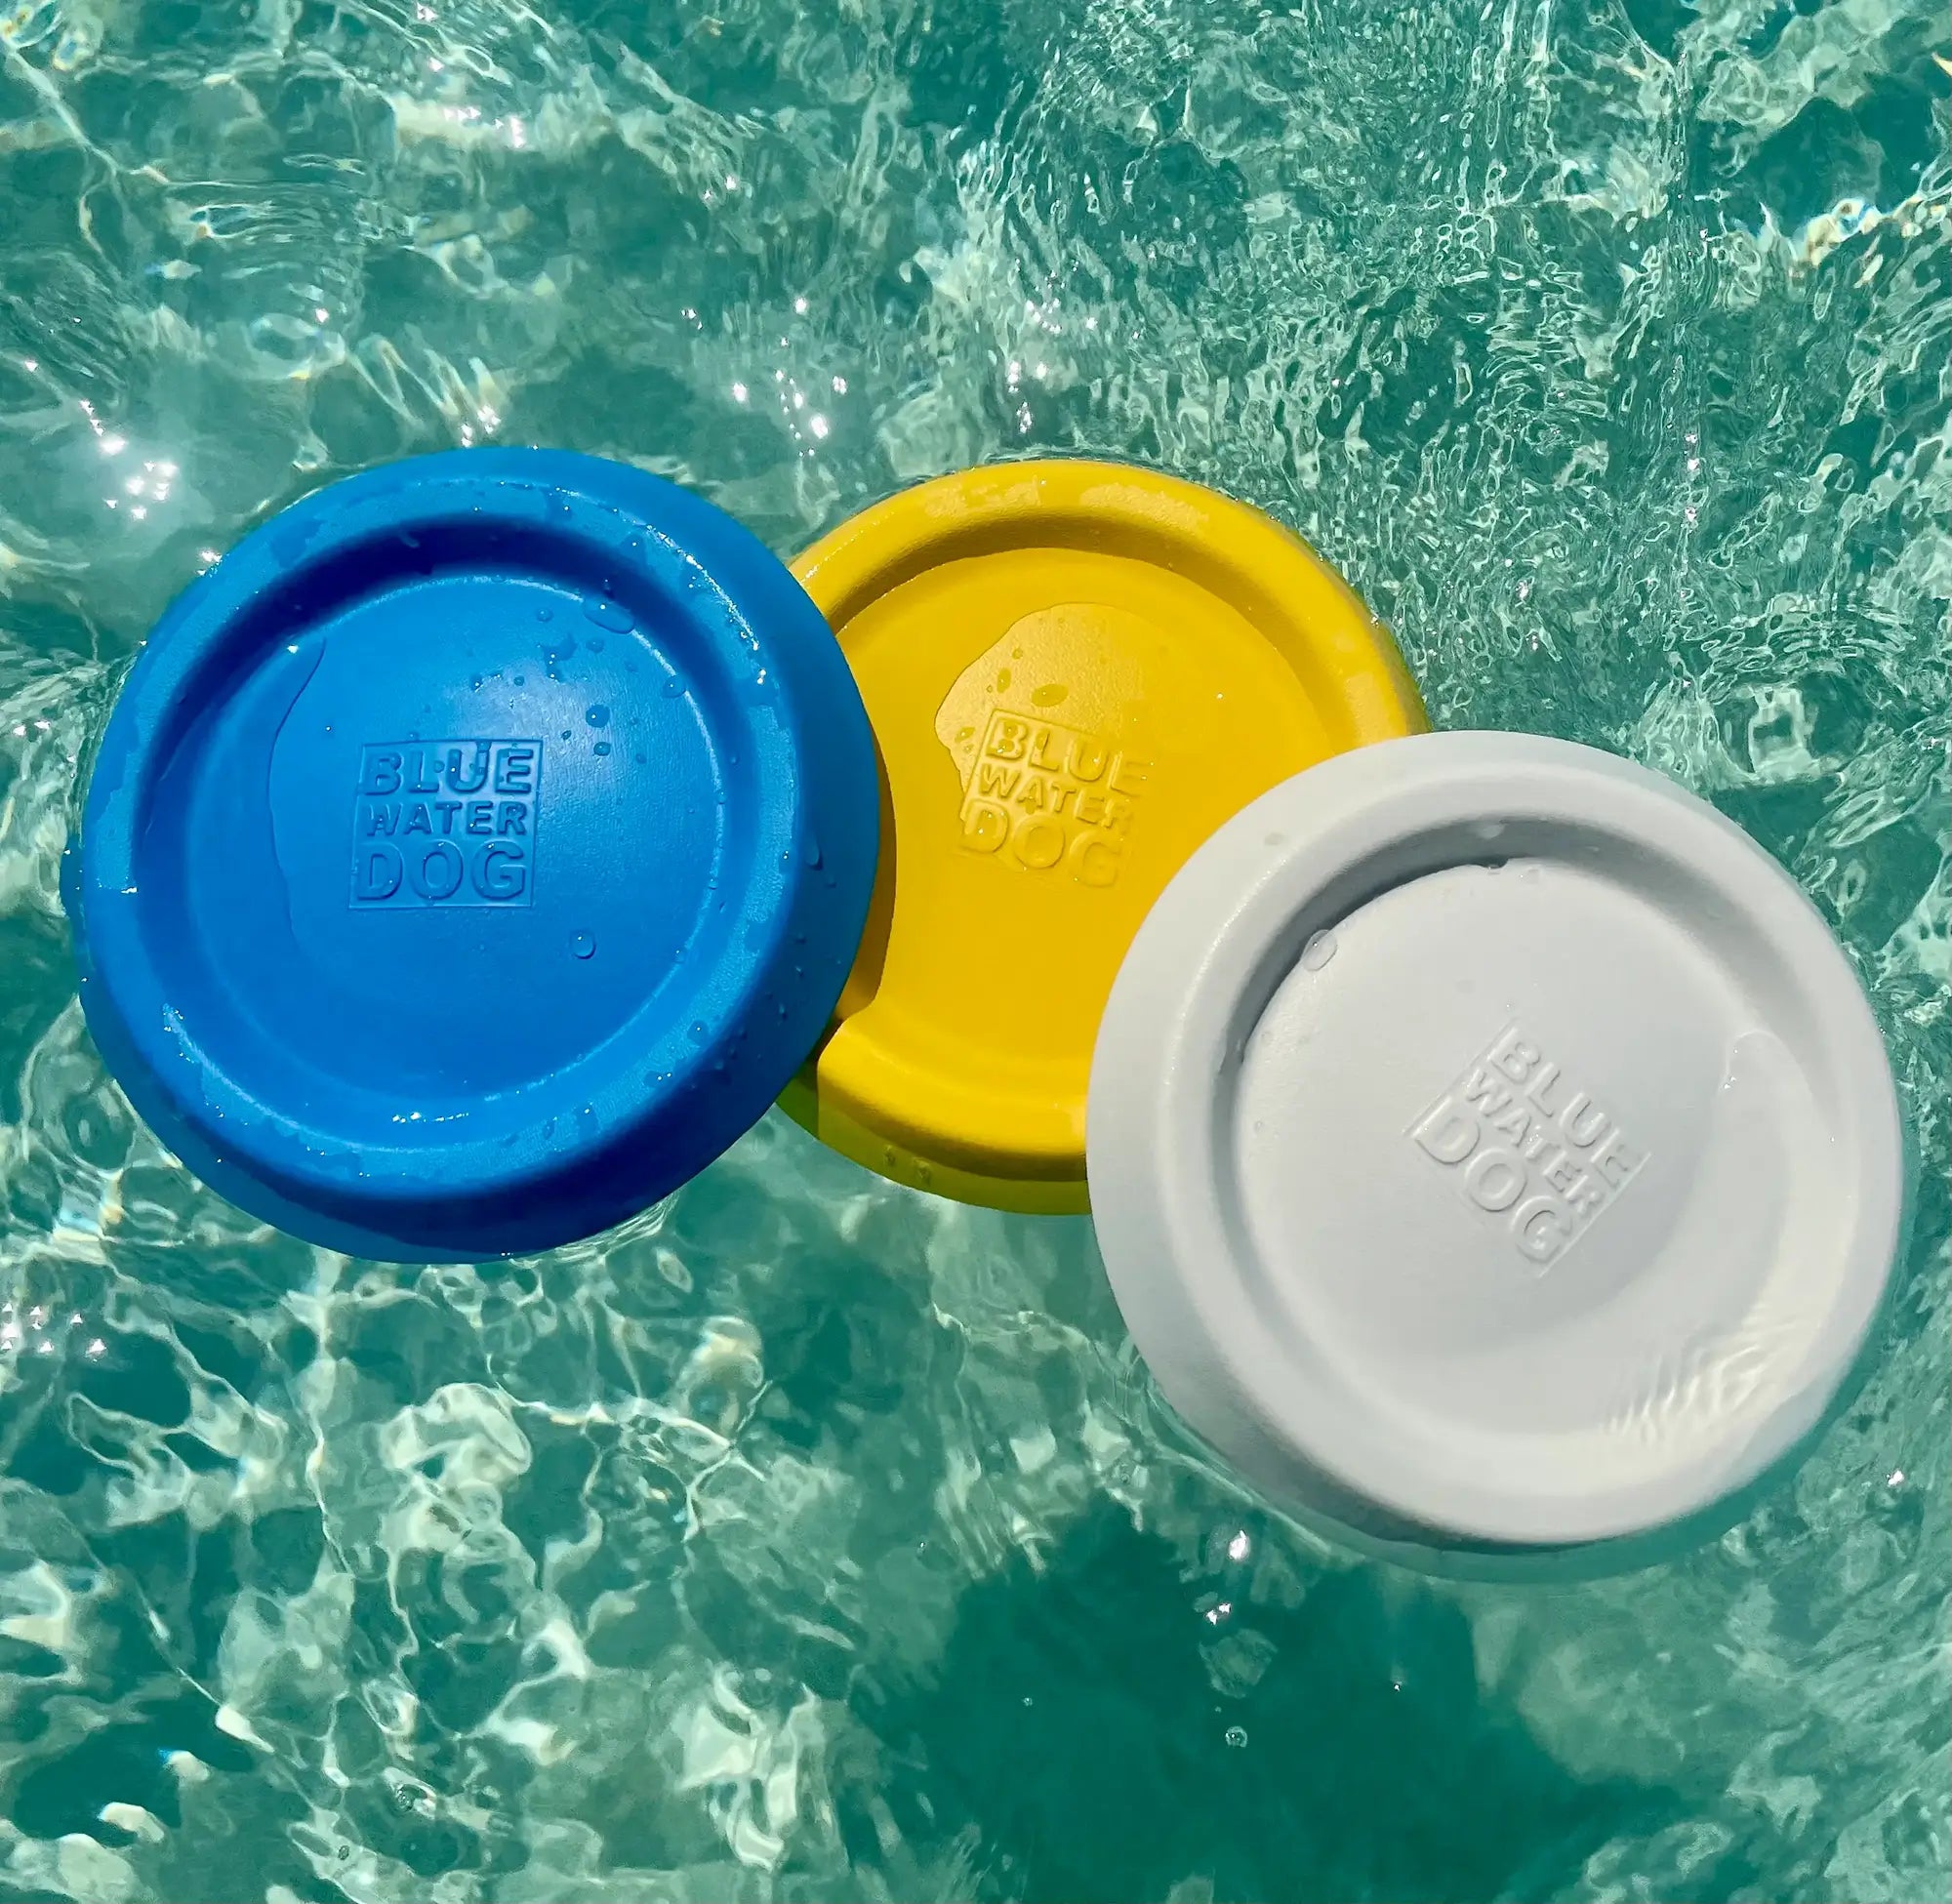 Three dog frisbees in the colors of blue, yellow, and white floating together in light blue ocean water.